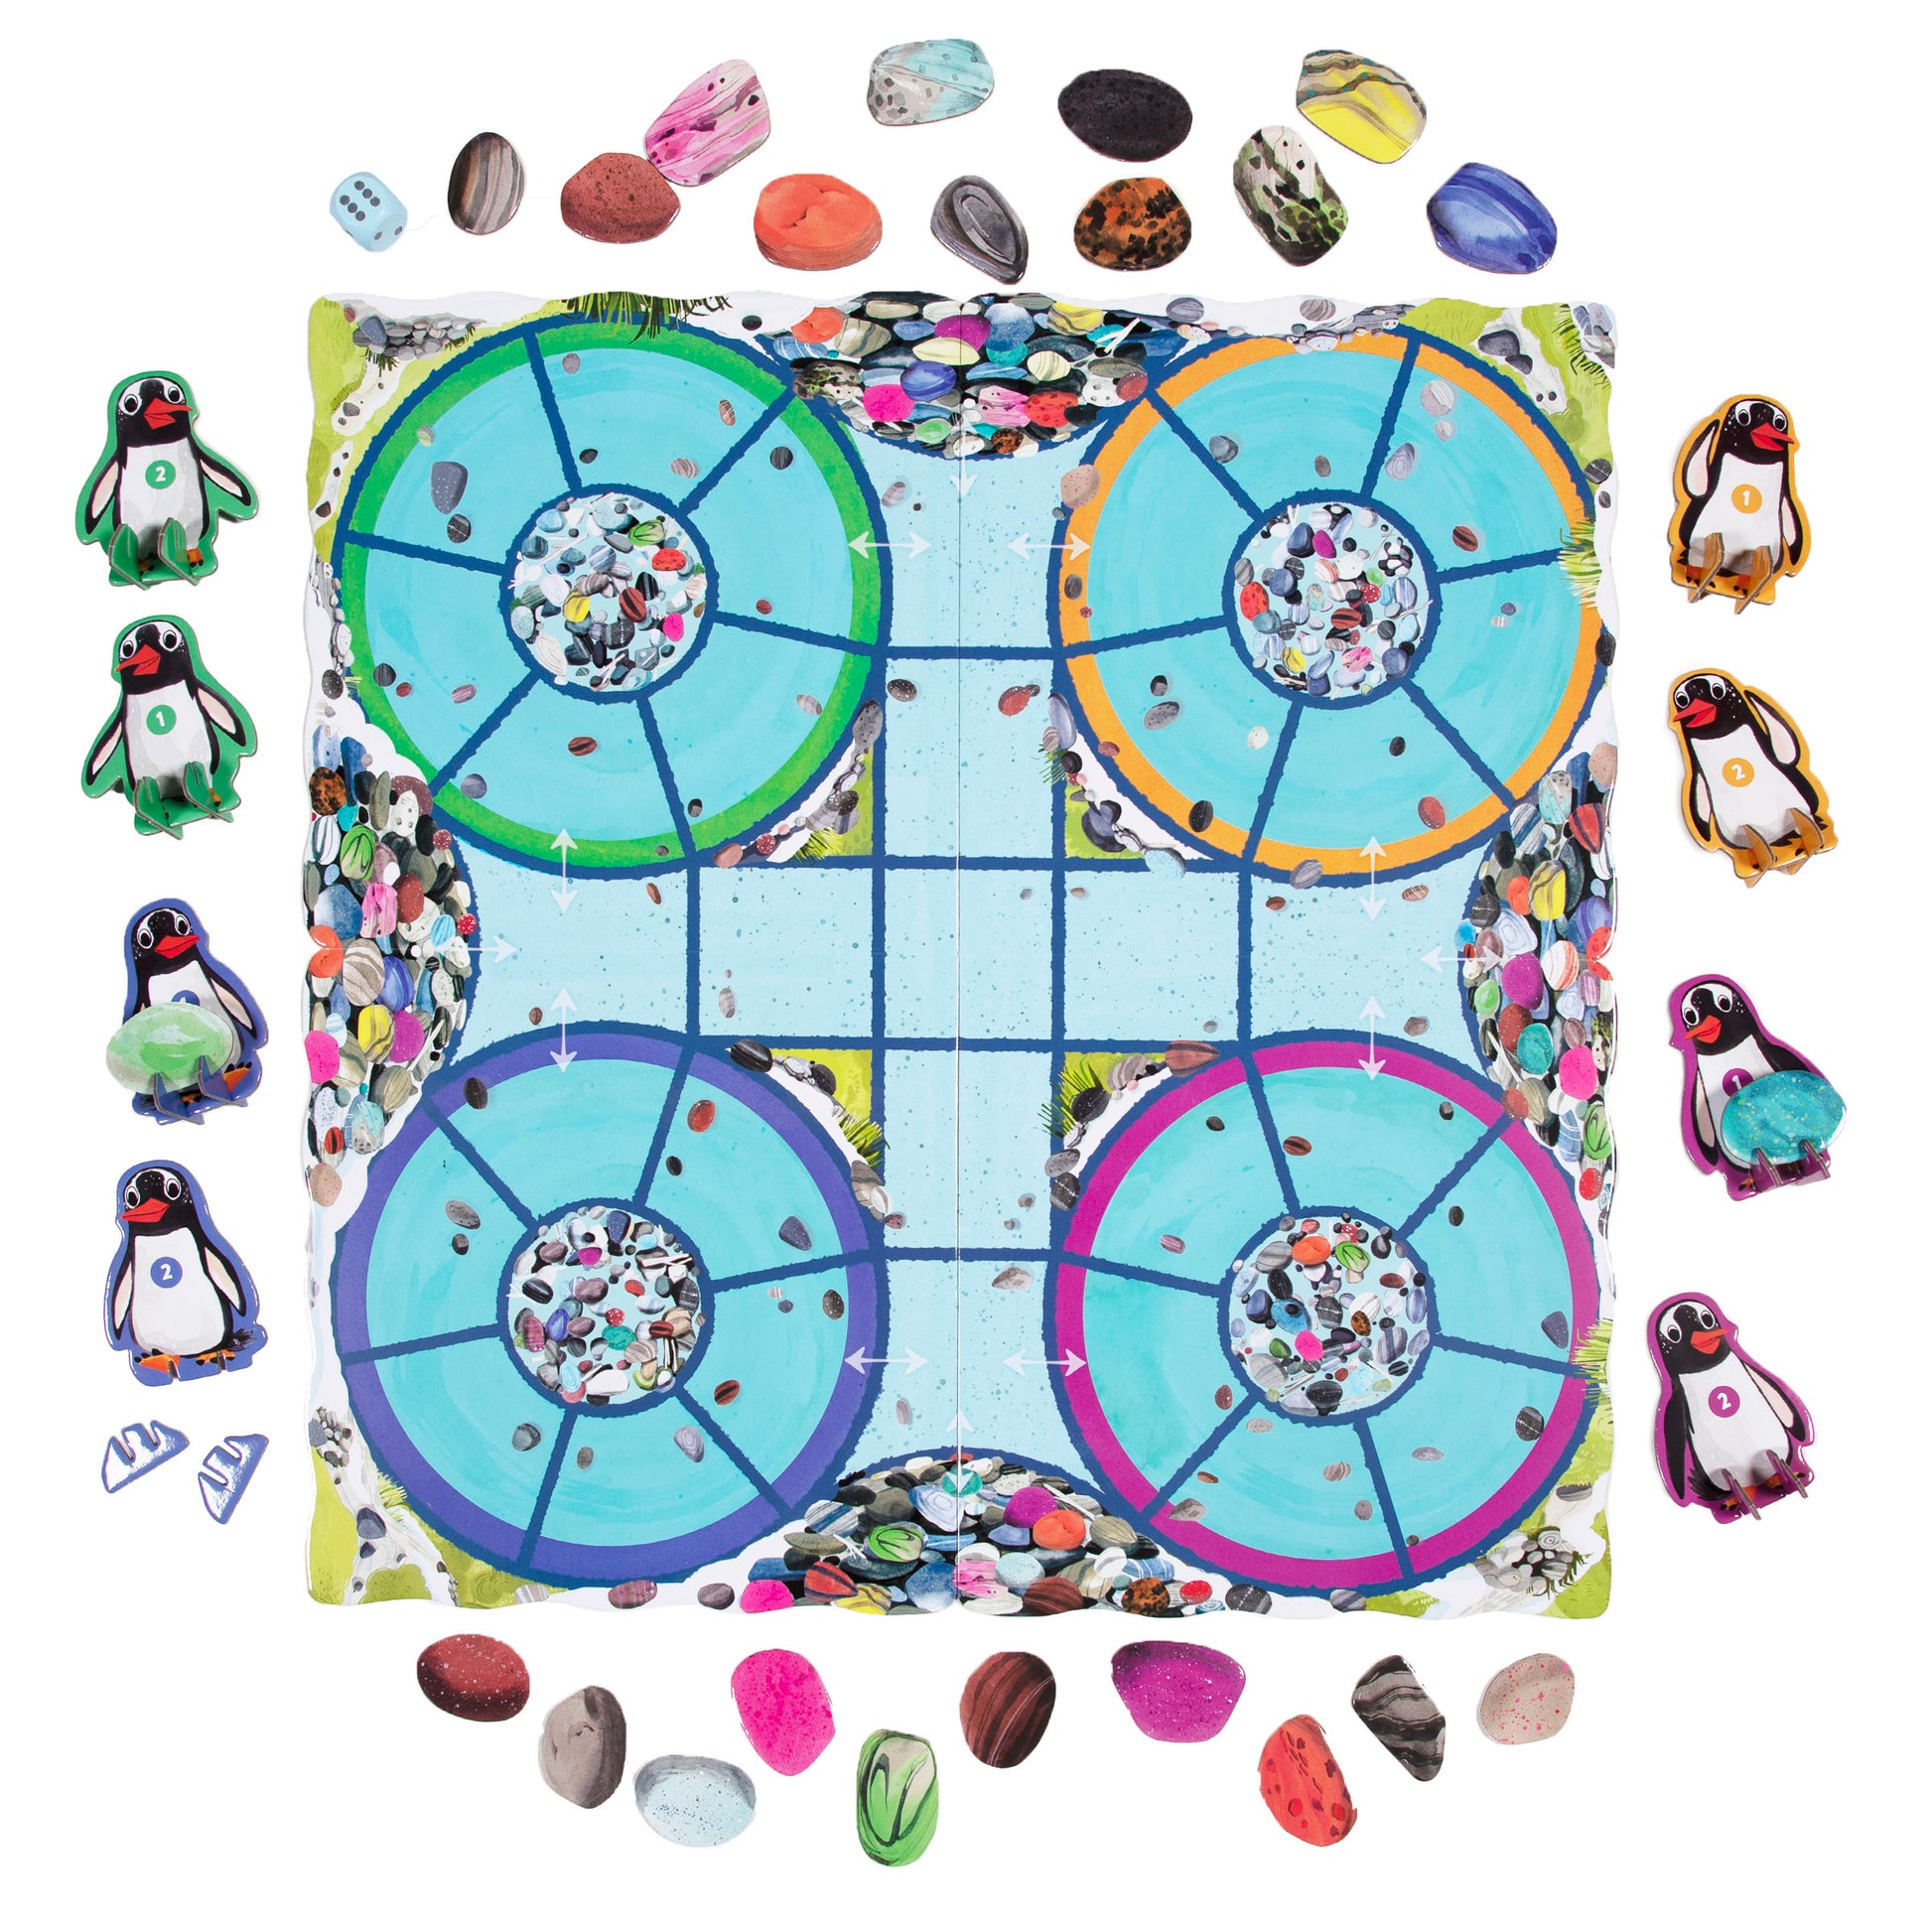 Penguins Rock! Board Game eeBoo Family Game Night Unique Gifts for Kids Ages 5+